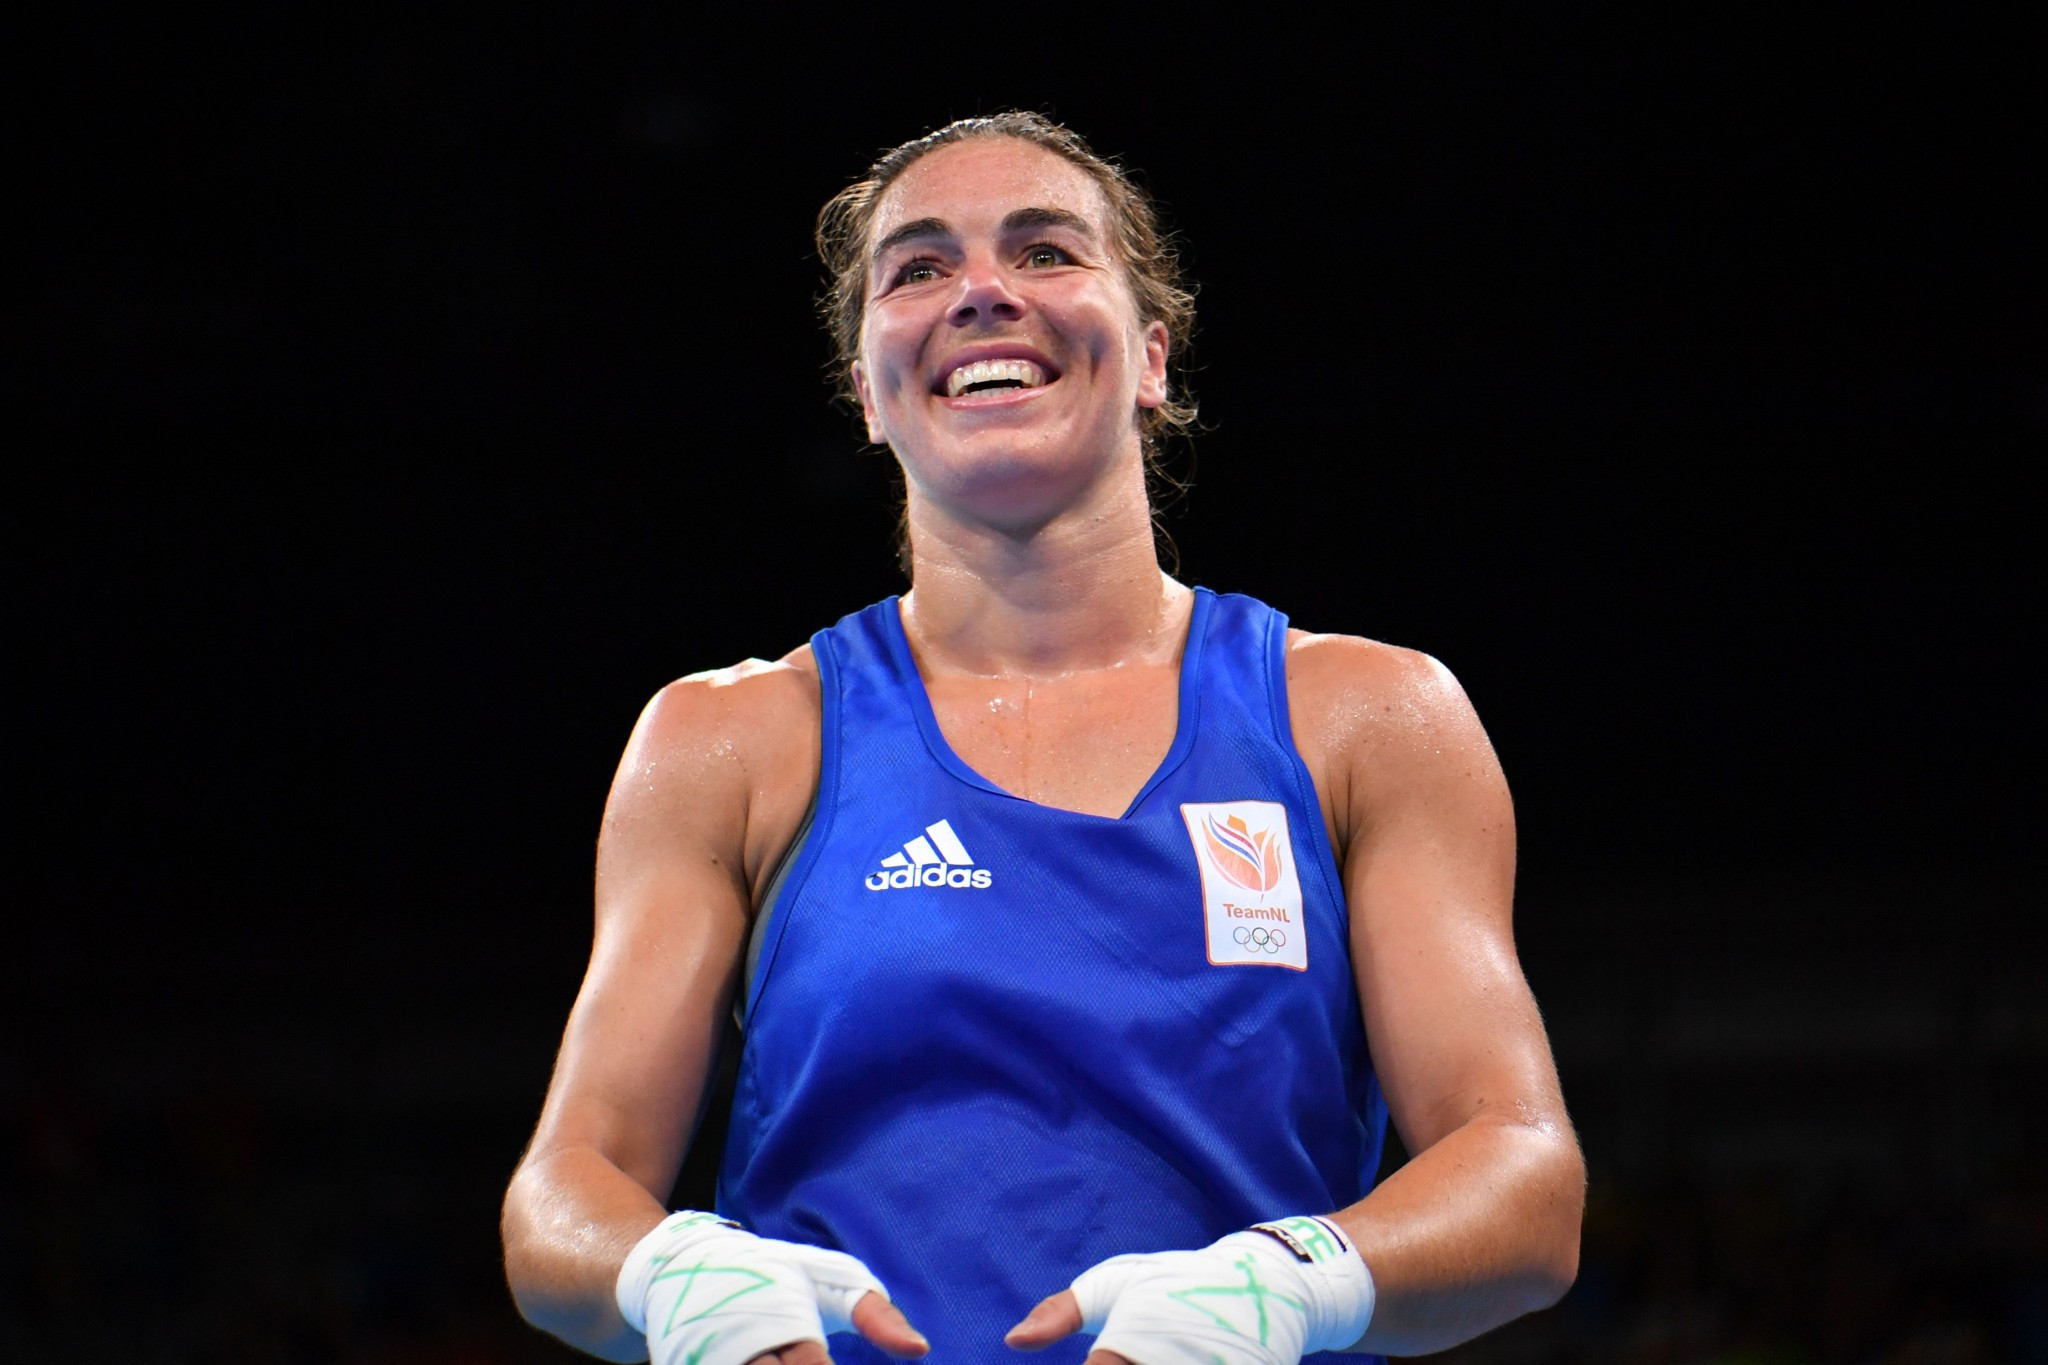 Dutch Boxing Federation President Boris van der Vorst referenced the country's success in the sport, including medals at back-to-back Olympics for Nouchka Fontijn ©Getty Images